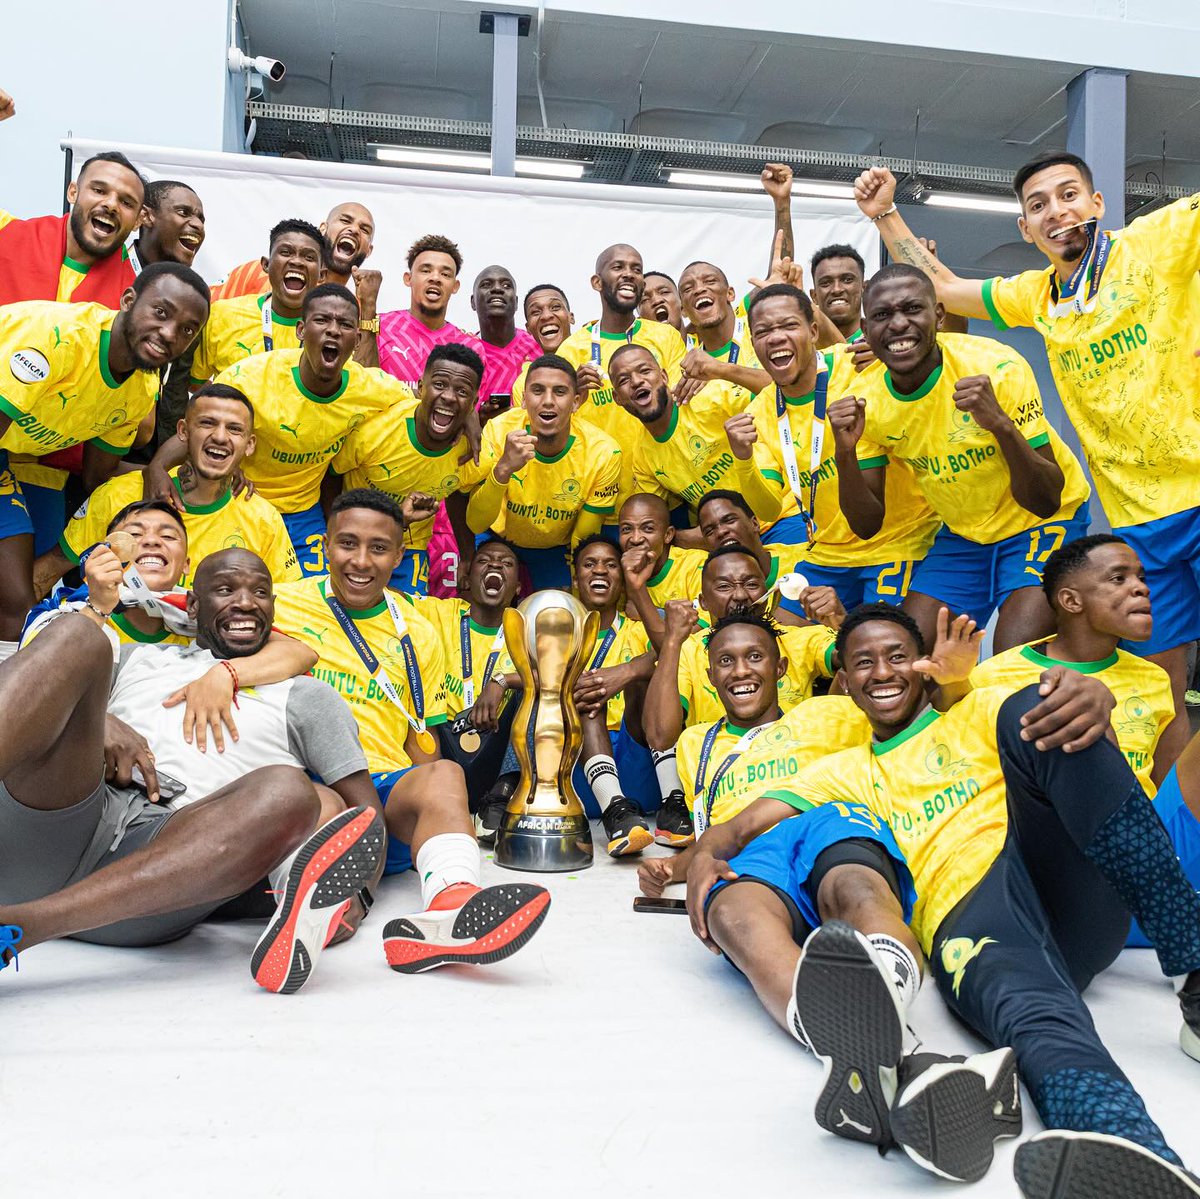 As a supporter of Mamelodi Sundowns, I really can't be hard on our boys. They played each and every game in MTN 8, AFL, and now they are in the semi finals on Nedbank cup and CAF Champions League. This team played a total of 43 games in a space of 8 months, and some of our…